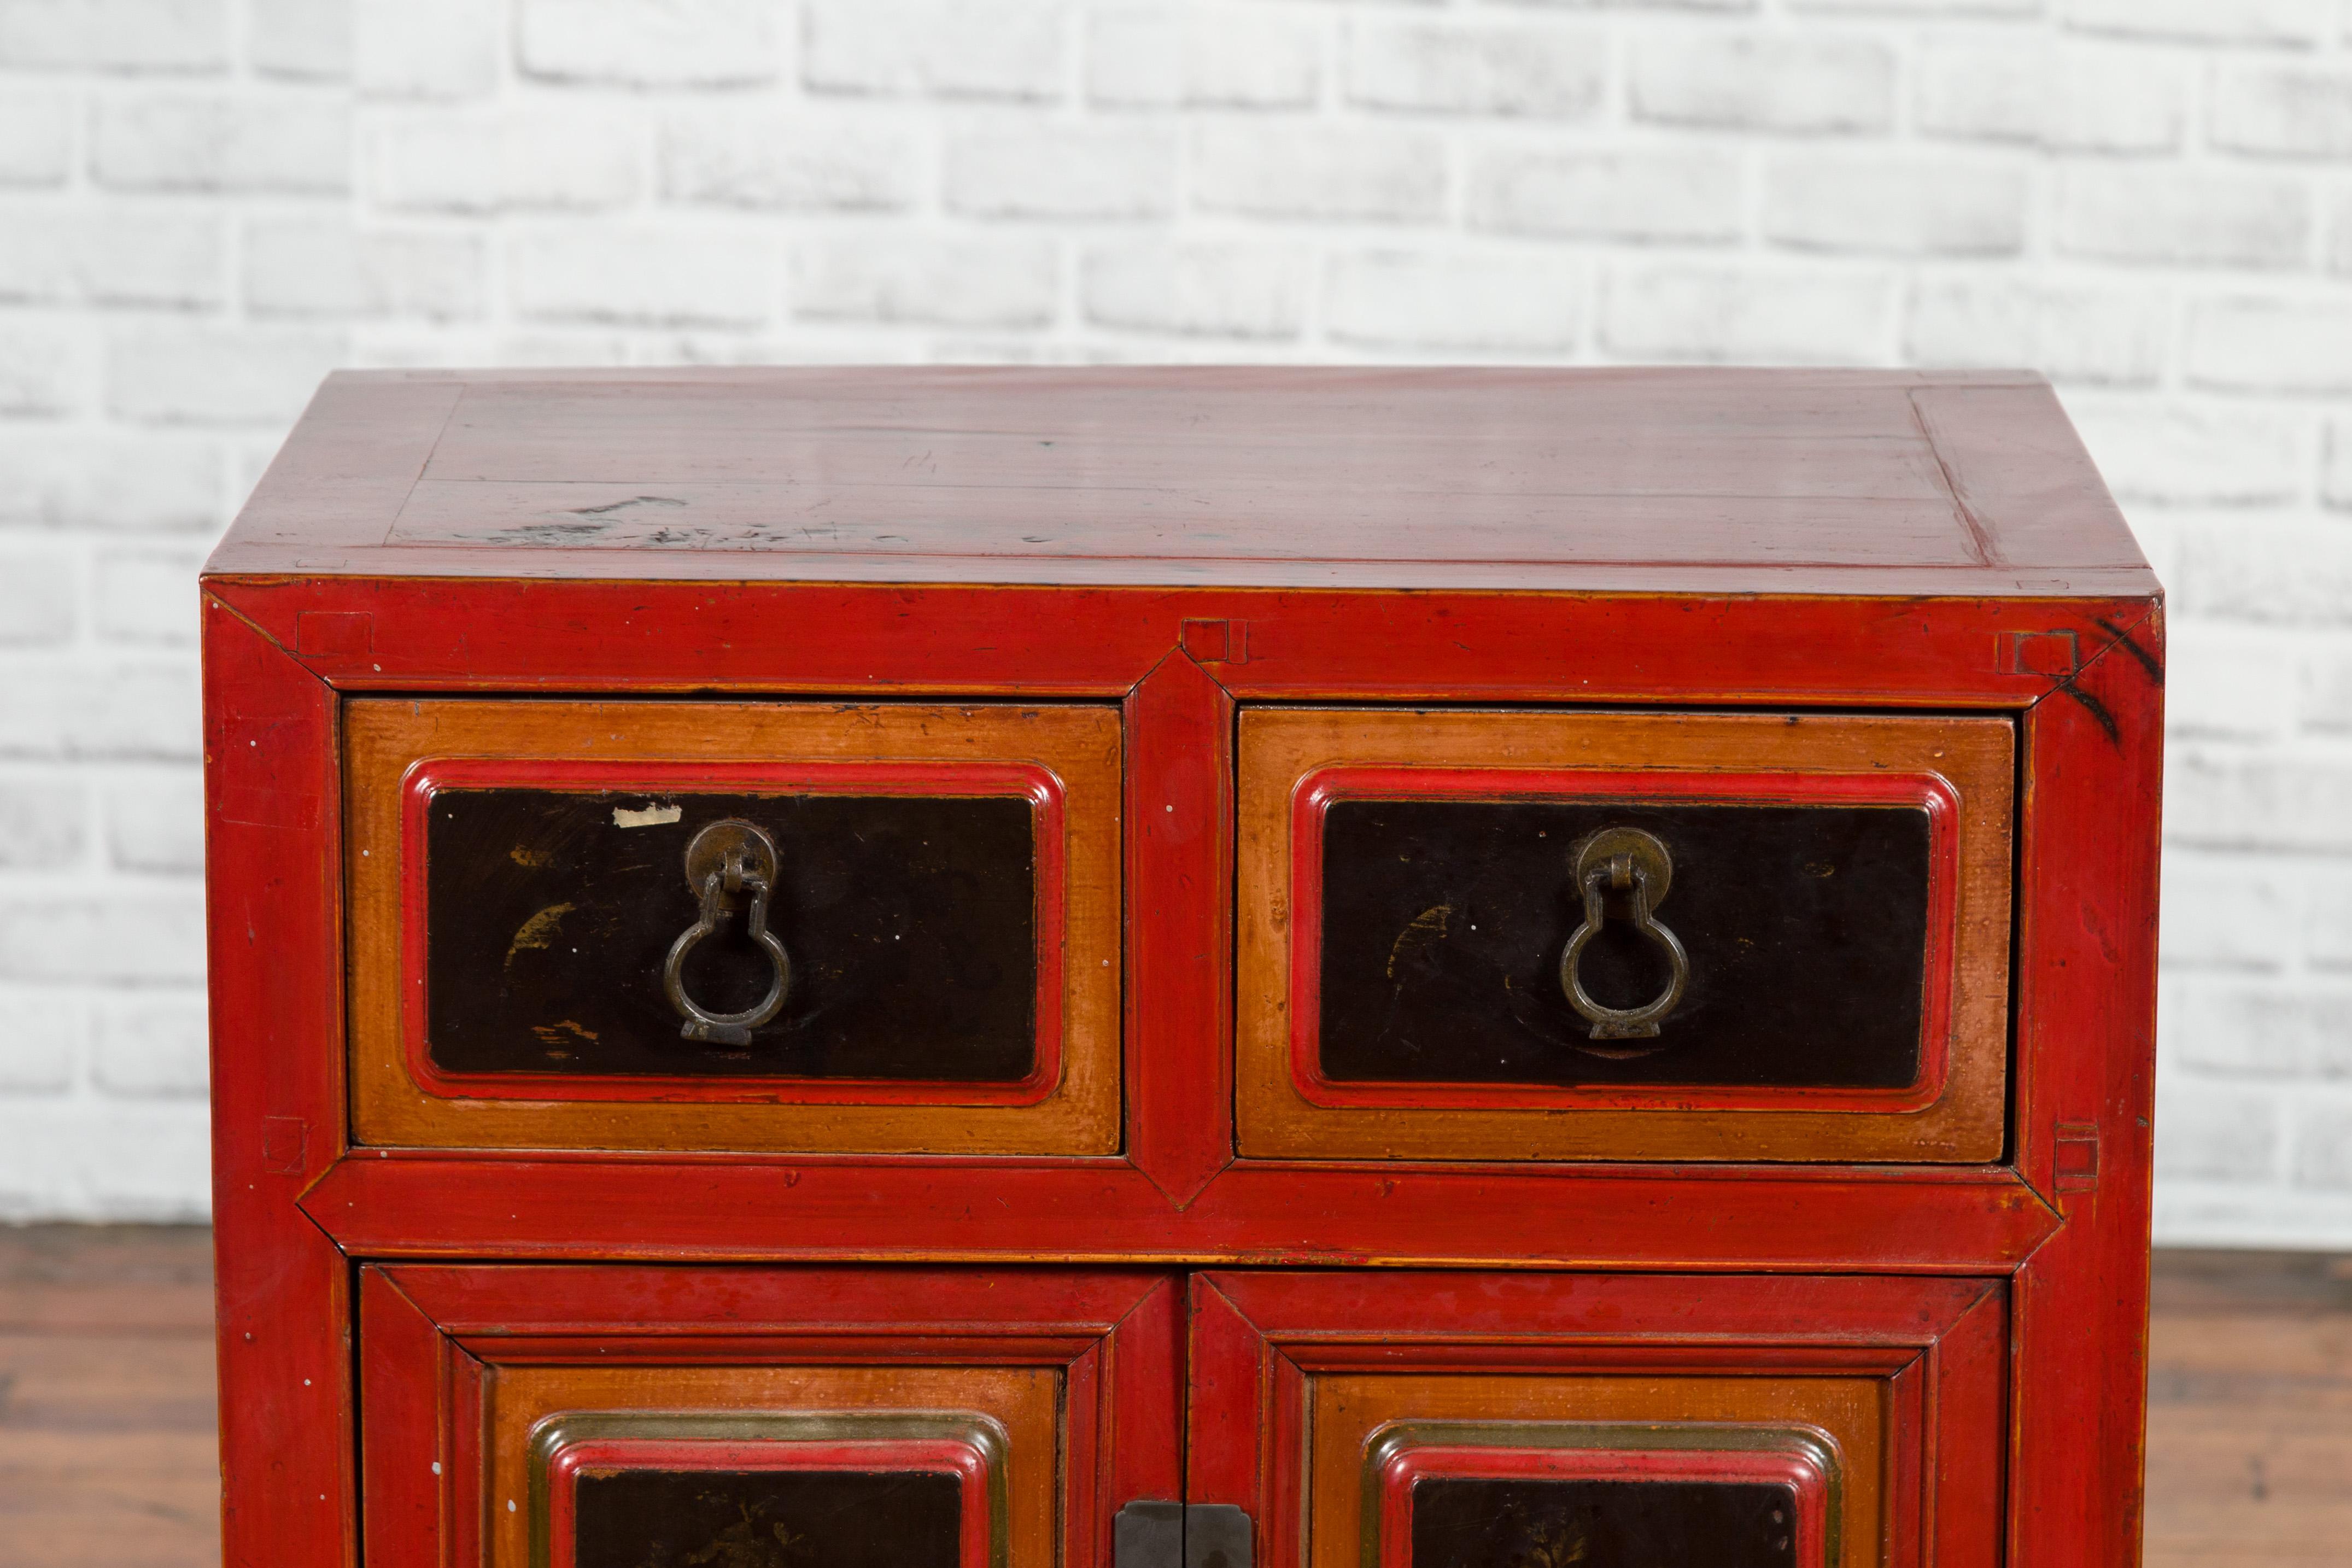 19th Century Chinese Black and Red Small Cabinet from the Qing Dynasty, with Carved Apron